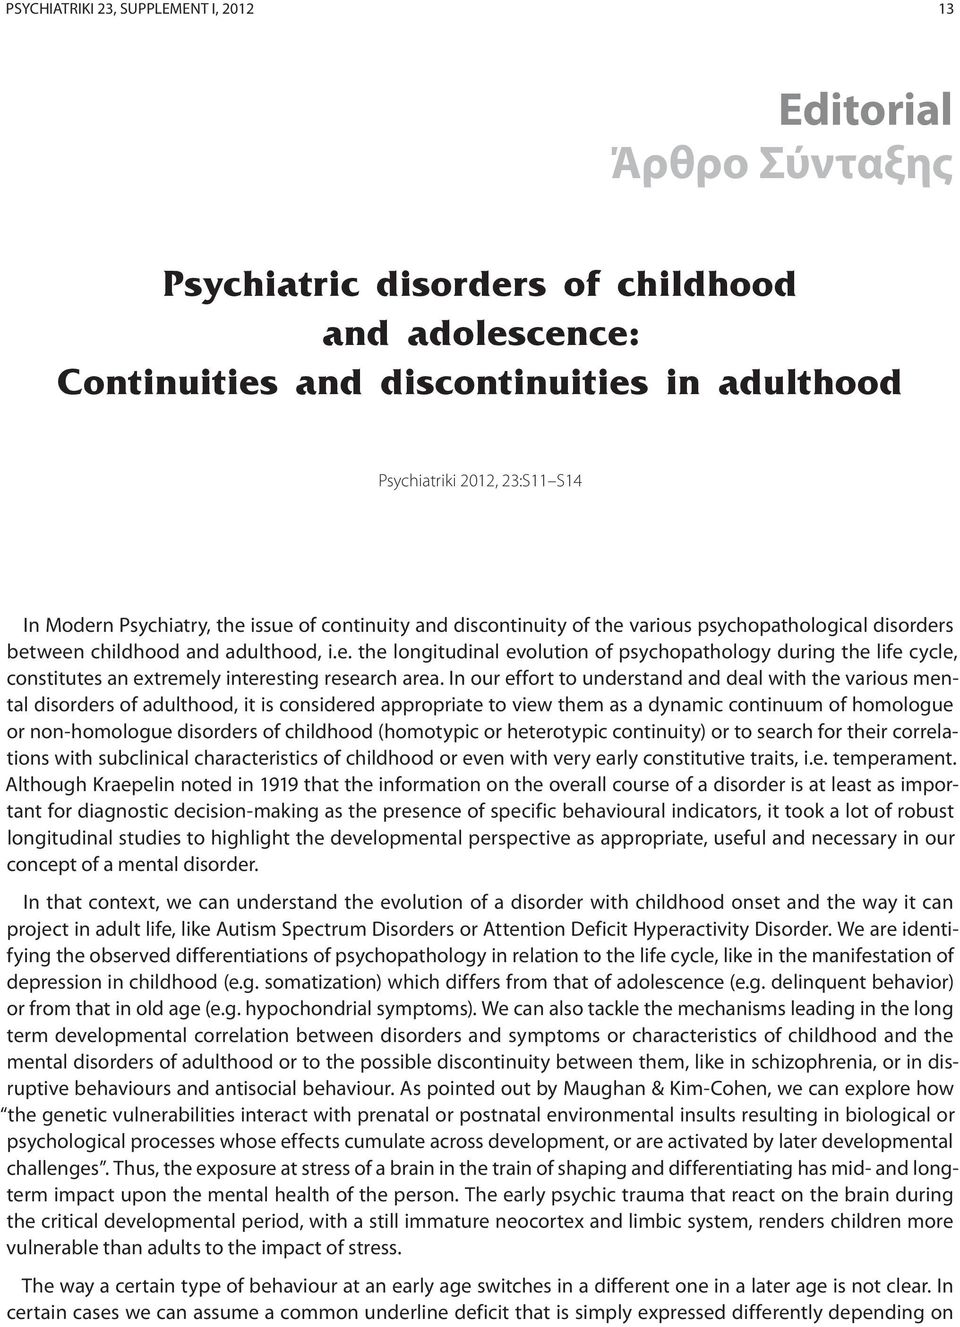 In our effort to understand and deal with the various mental disorders of adulthood, it is considered appropriate to view them as a dynamic continuum of homologue or non-homologue disorders of